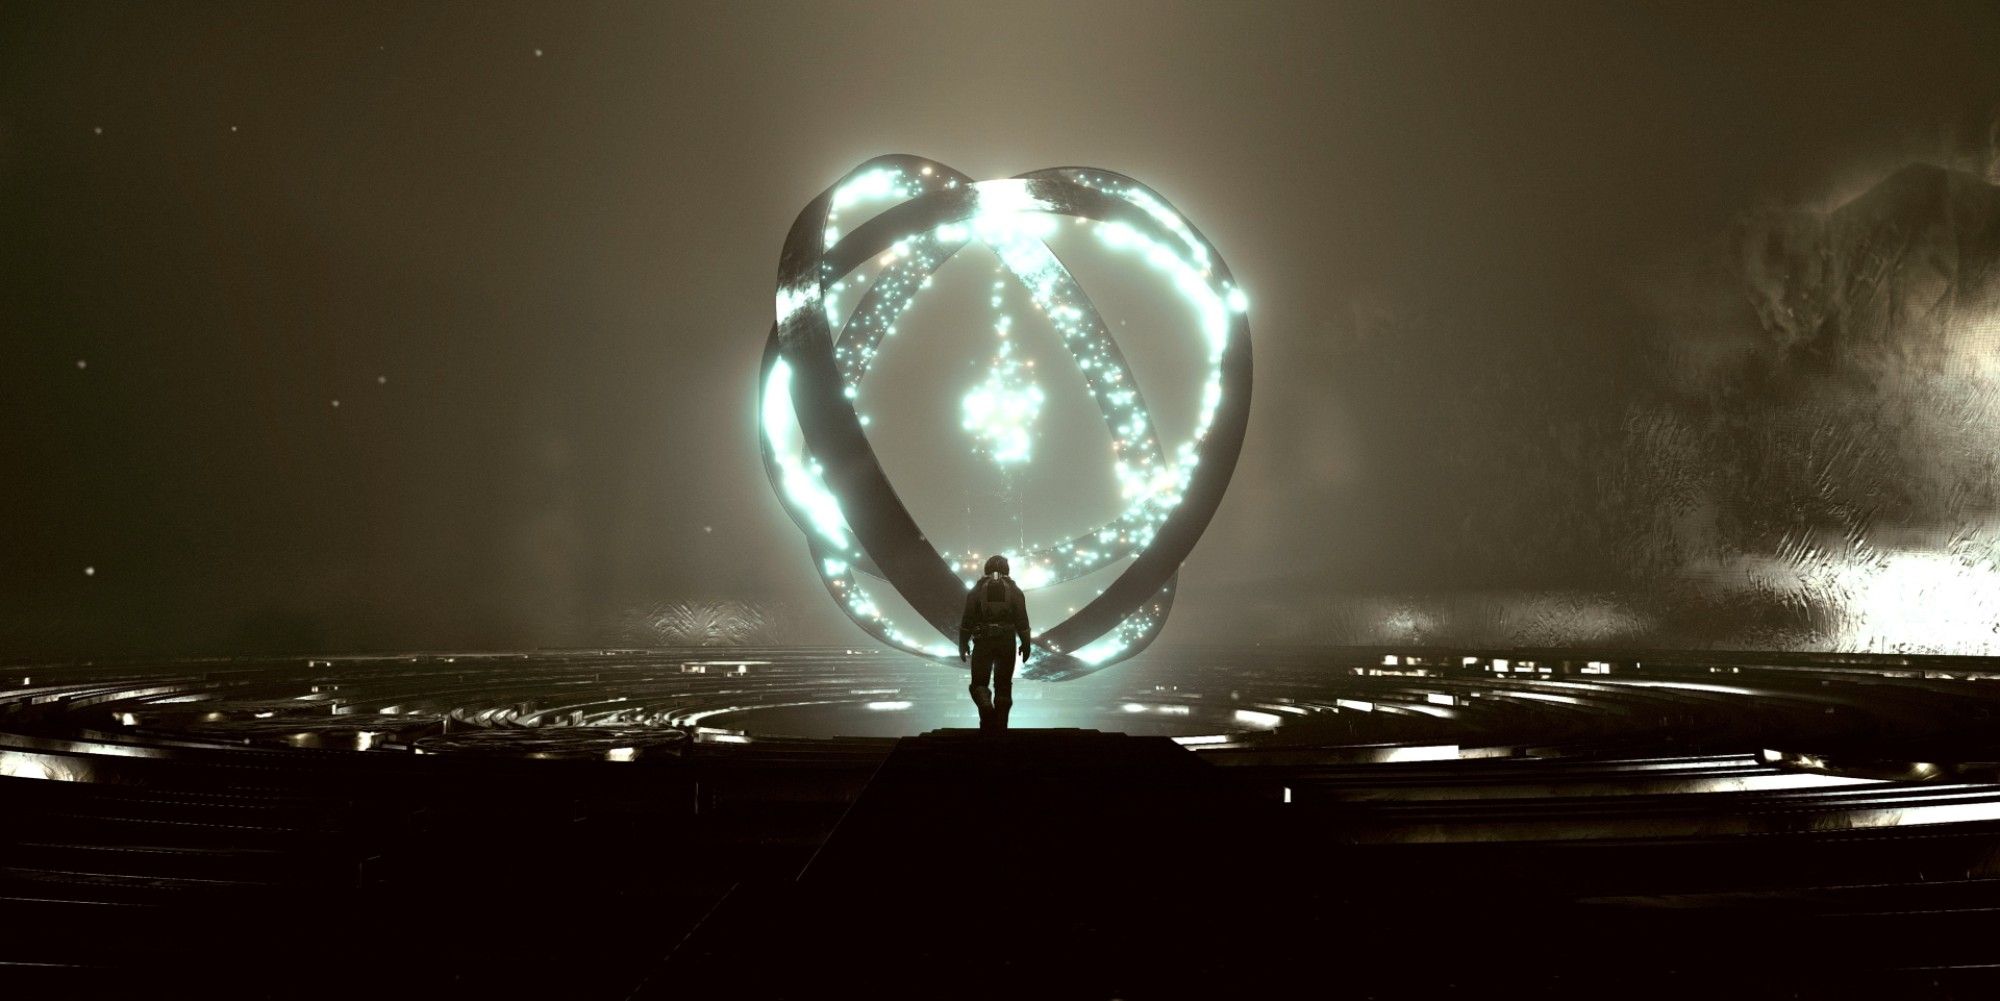 Starfield astronaut stepping into the orb